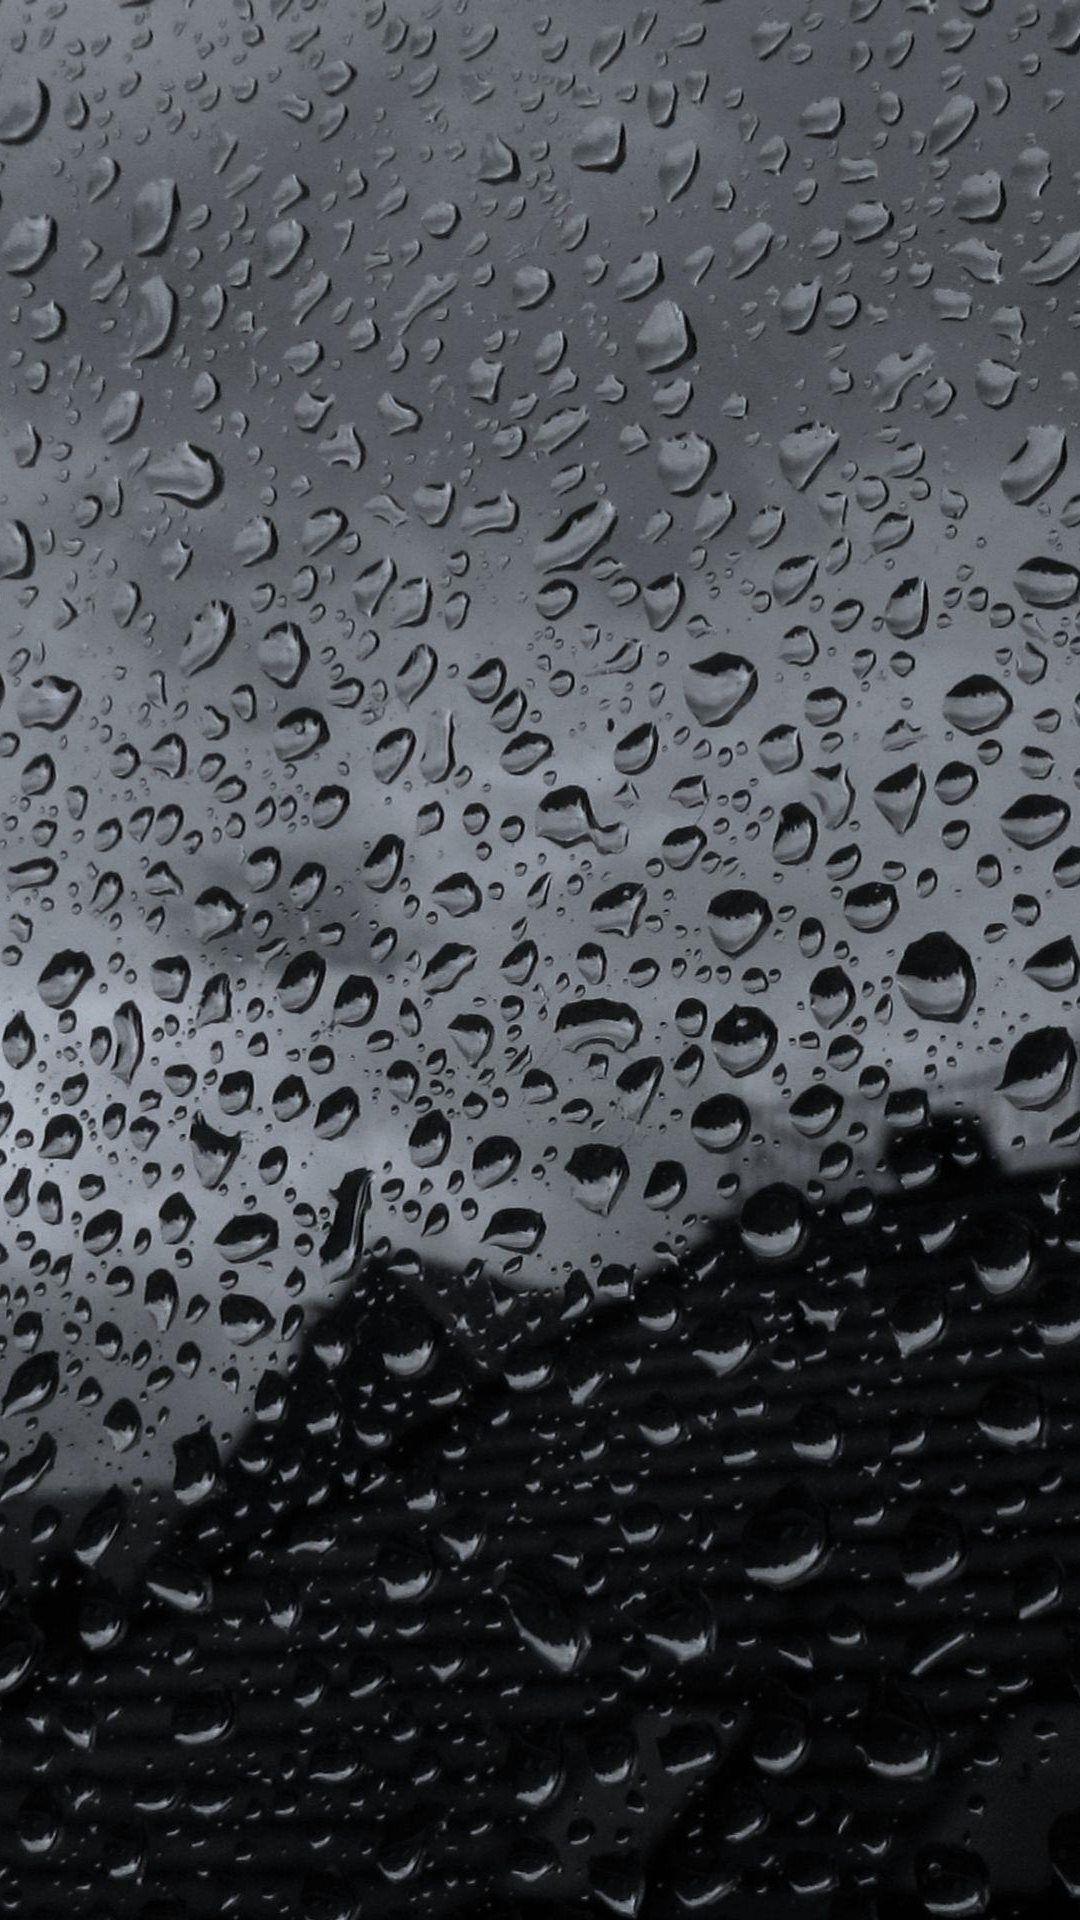 Drops On Glass Black And White Android Wallpaper free download